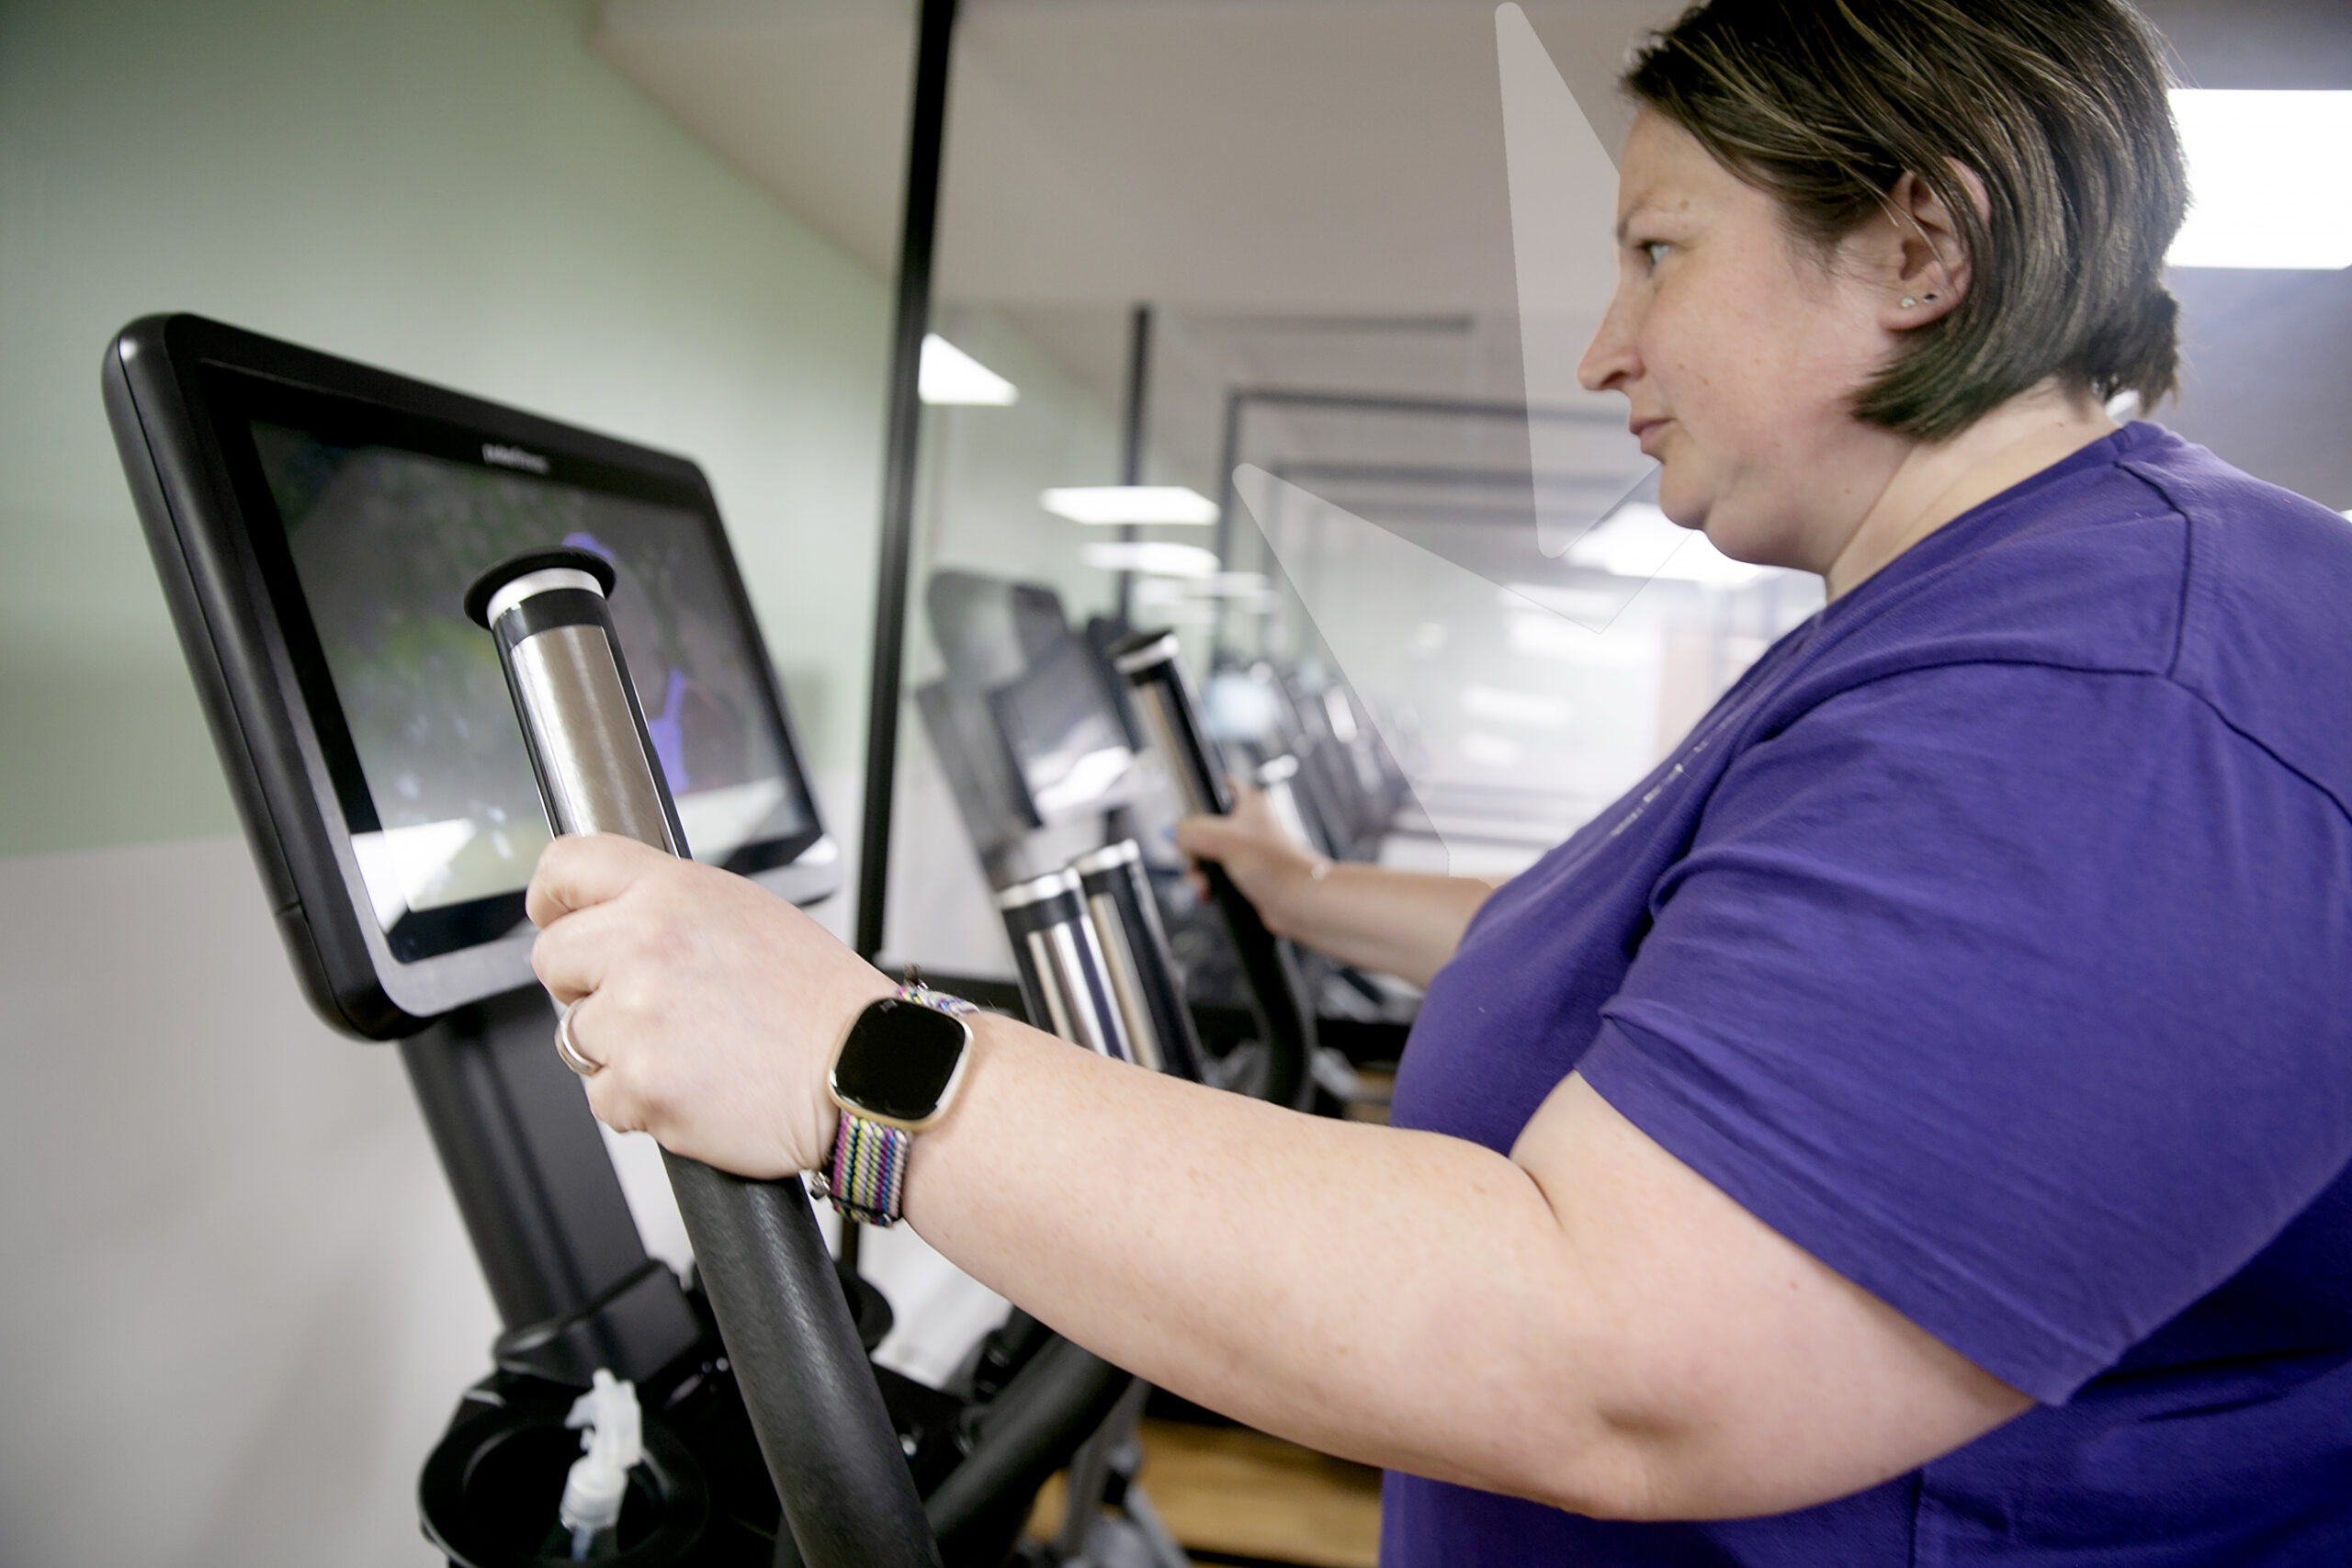 A middle aged lady wearing a purple top, watching the screen on a cross trainer